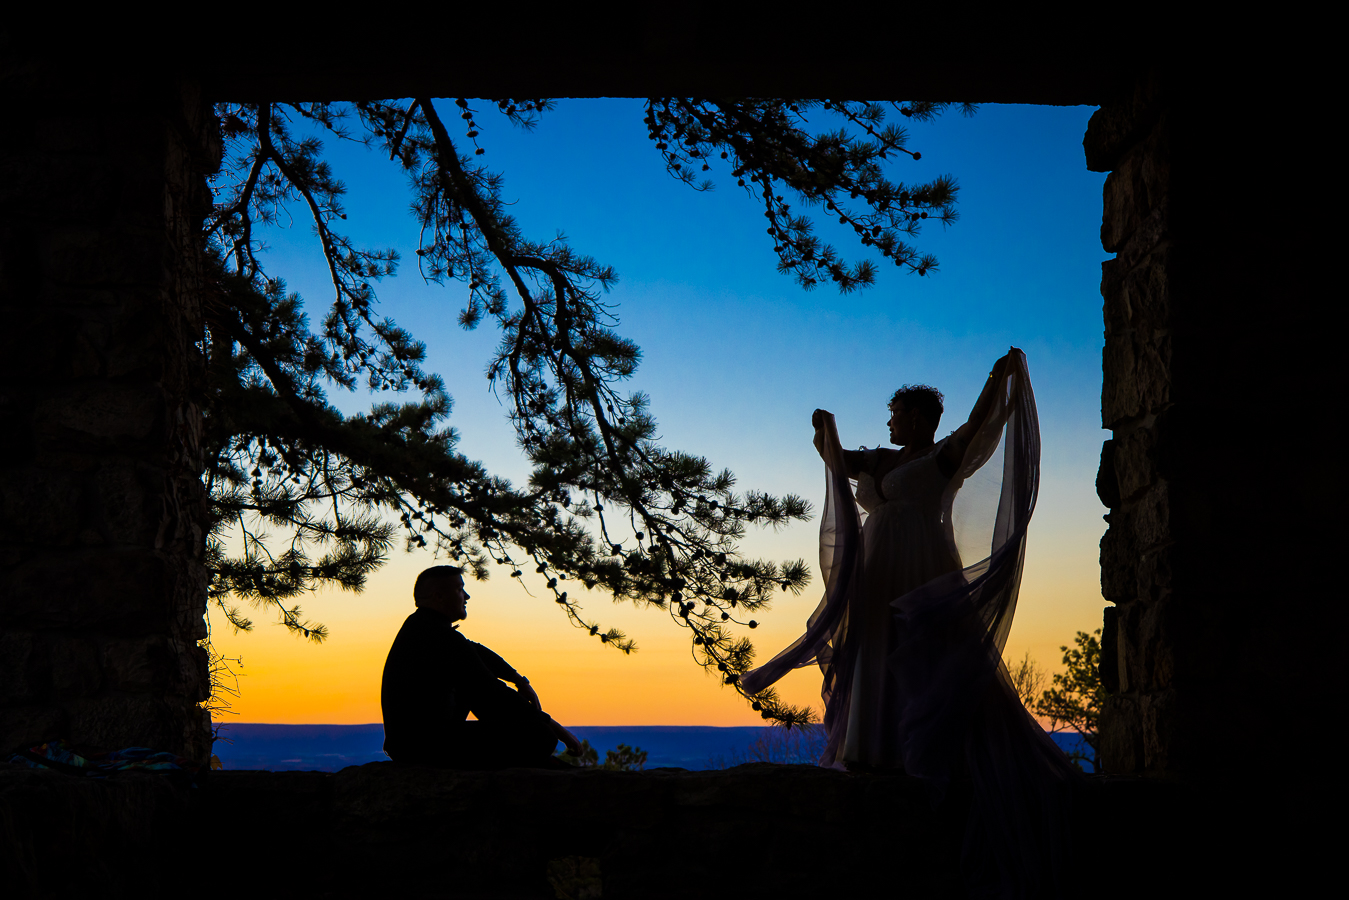 washington dc LGBTQ Wedding Photographer, lisa rhinehart, captures this vibrant, colorful silhouette of this couple as they dance while watching the sunset at Kings Gap Mansion 